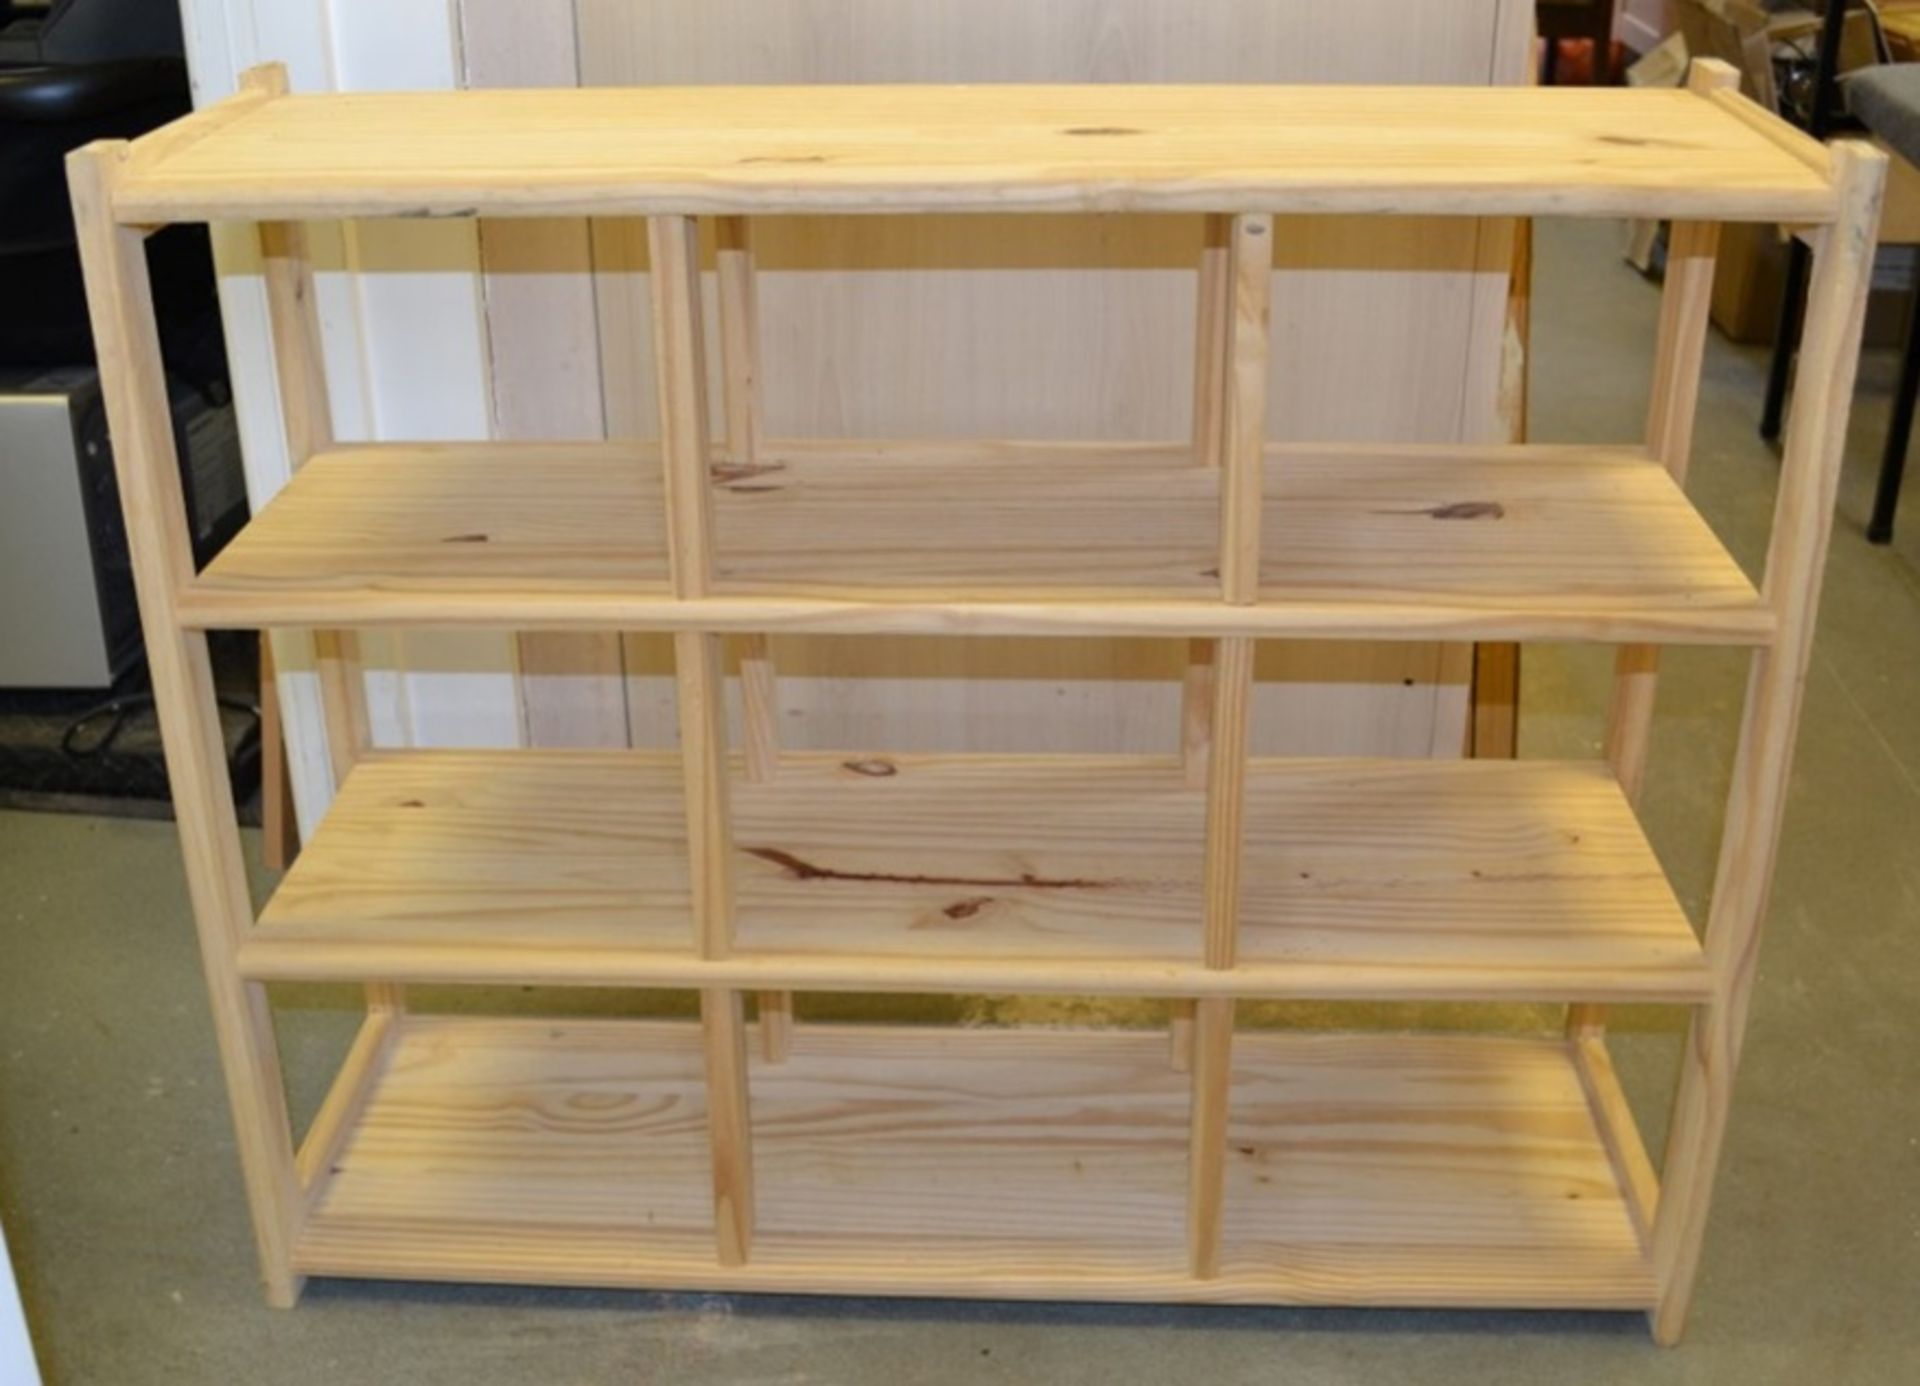 1 x Wooden Shoe Rack - From A Clean Manor House Environment In Good Condition - Dimensions: W84 x